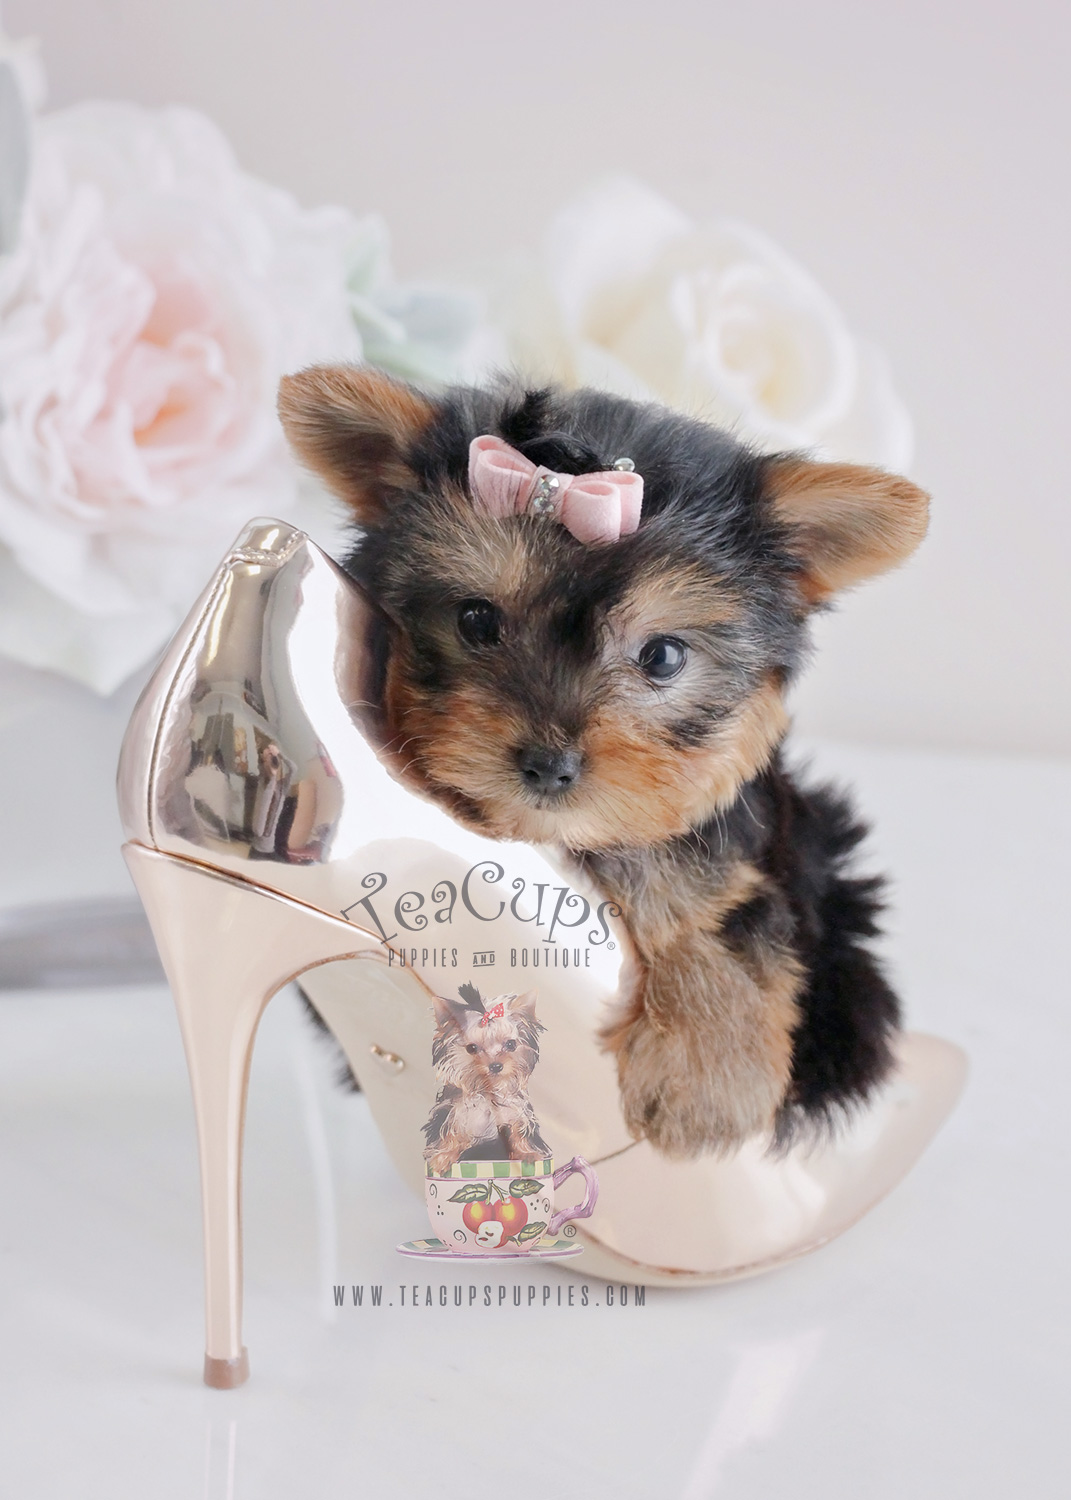 For Sale #064 Teacups Puppies Yorkie Puppy